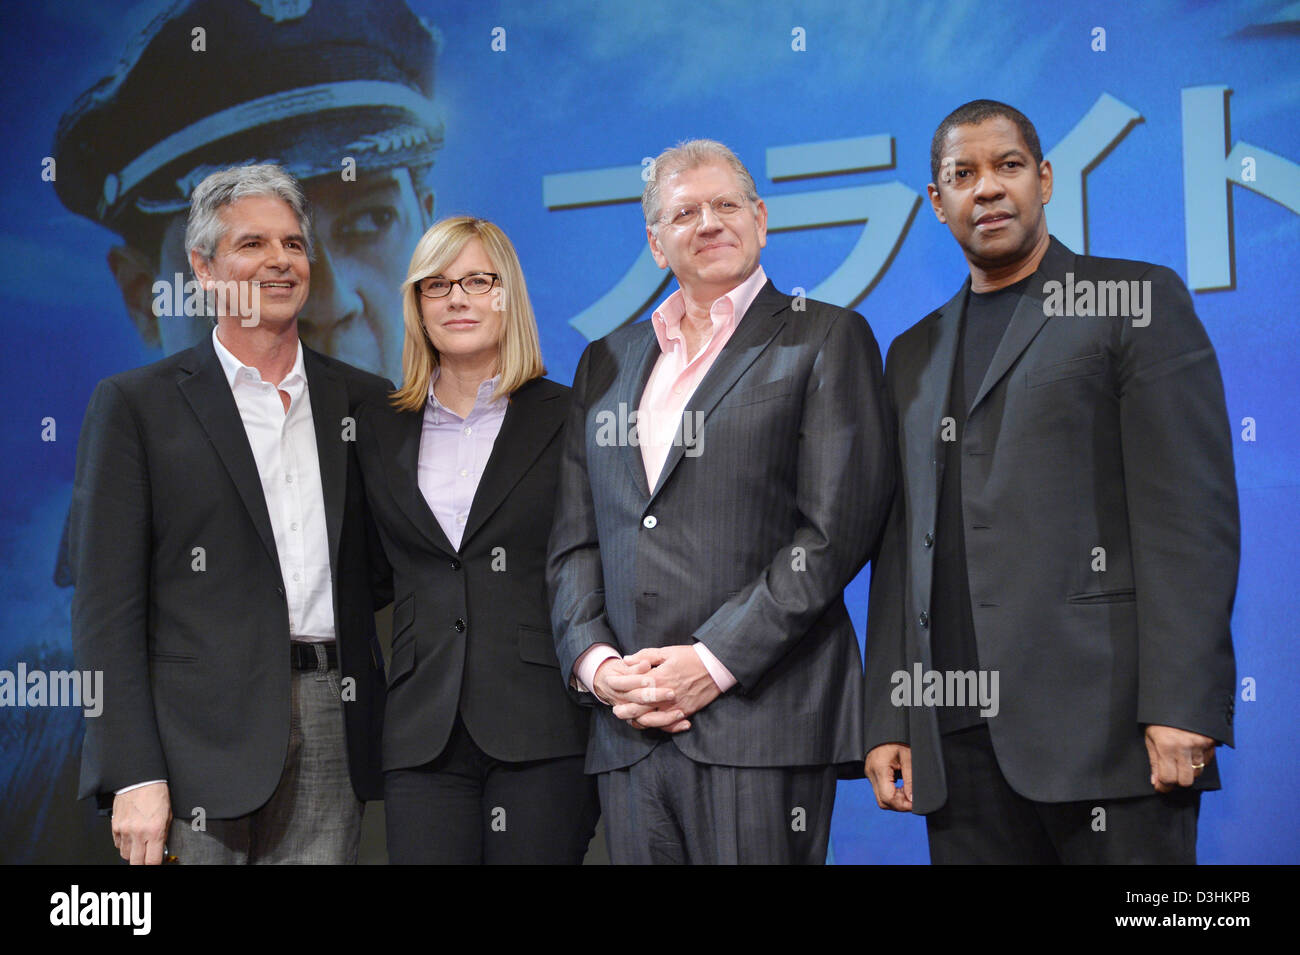 Tokyo, Japan. Feb 20, 2013. Walter F. Parkes, Laurie MacDonald, Robert Zemeckis and Denzel WashingtonOscar-nominee Denzel Washington, right, and director Robert Zemeckis appear before Japanese fans in Tokyo on Wednesday, February 20, 2013. The American screen star and the film director were in town to promote their latest film 'Flight,' for which Washington was nominated for Best Actor. Others are, Producers Walter F. Parkes, left, and Laurie MacDonald. Photo by Natsuki Sakai/AFLO/Alamy Live News Stock Photo